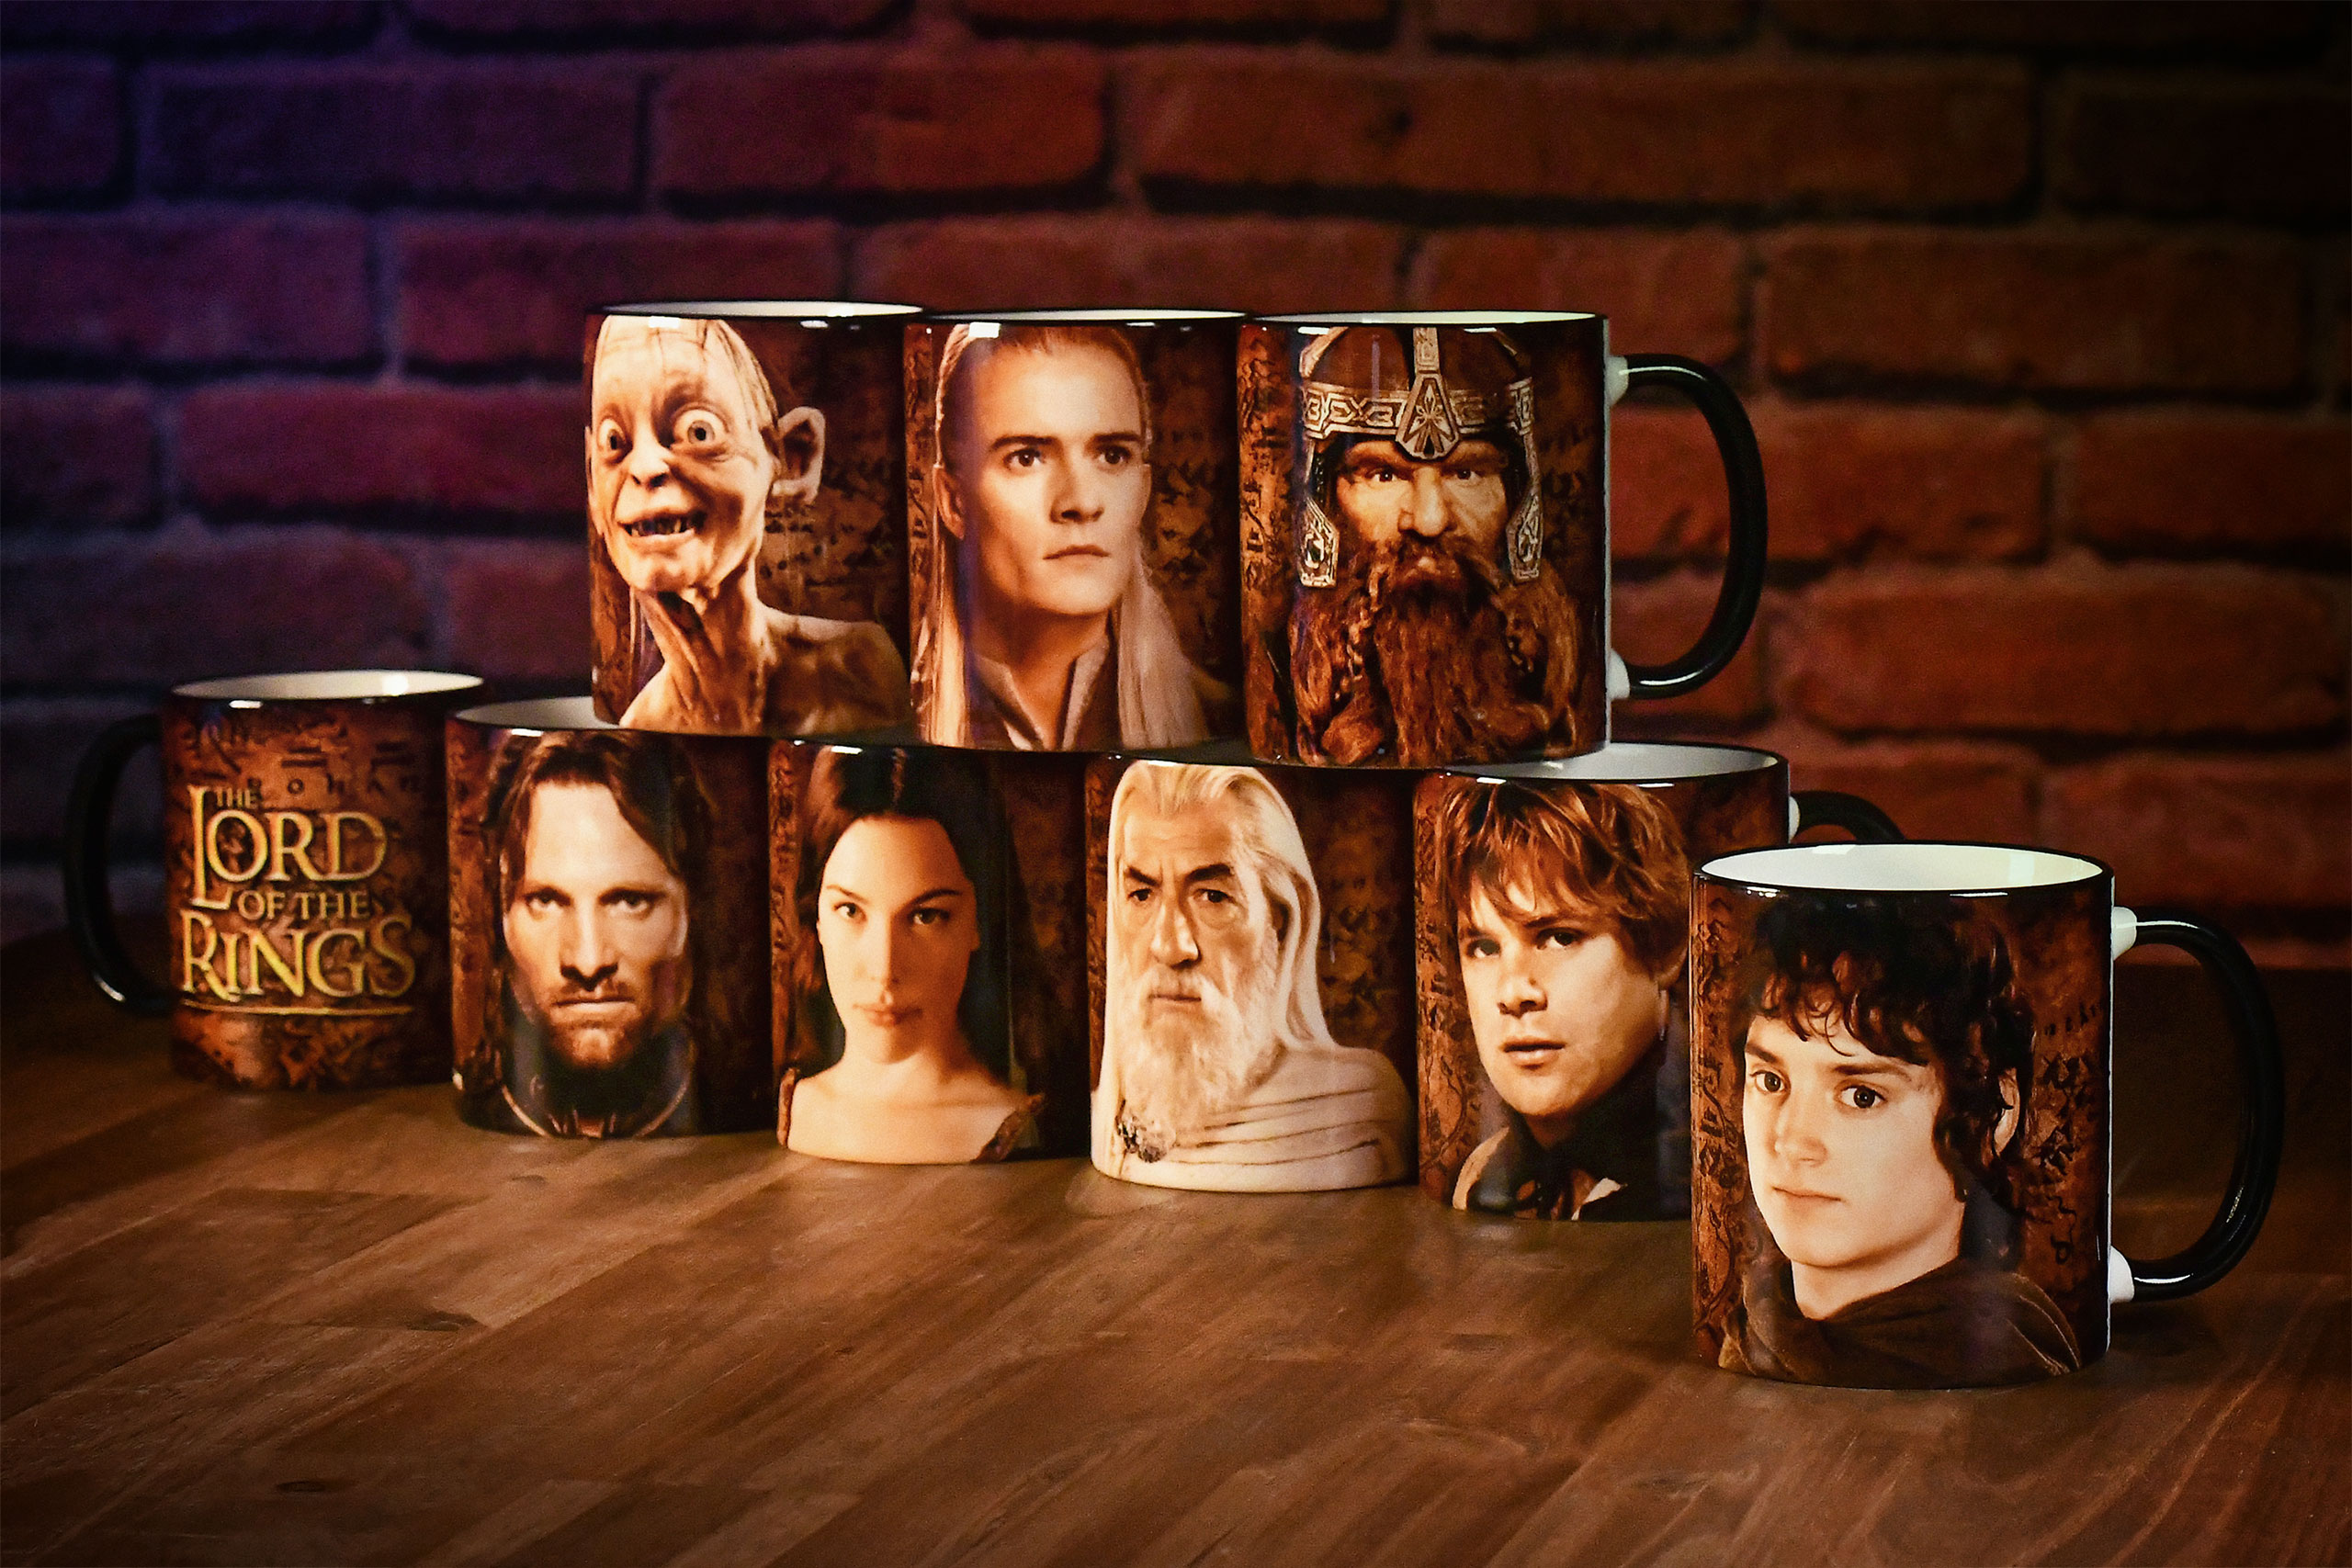 Frodo anniversary mug - 20 years of Lord of the Rings